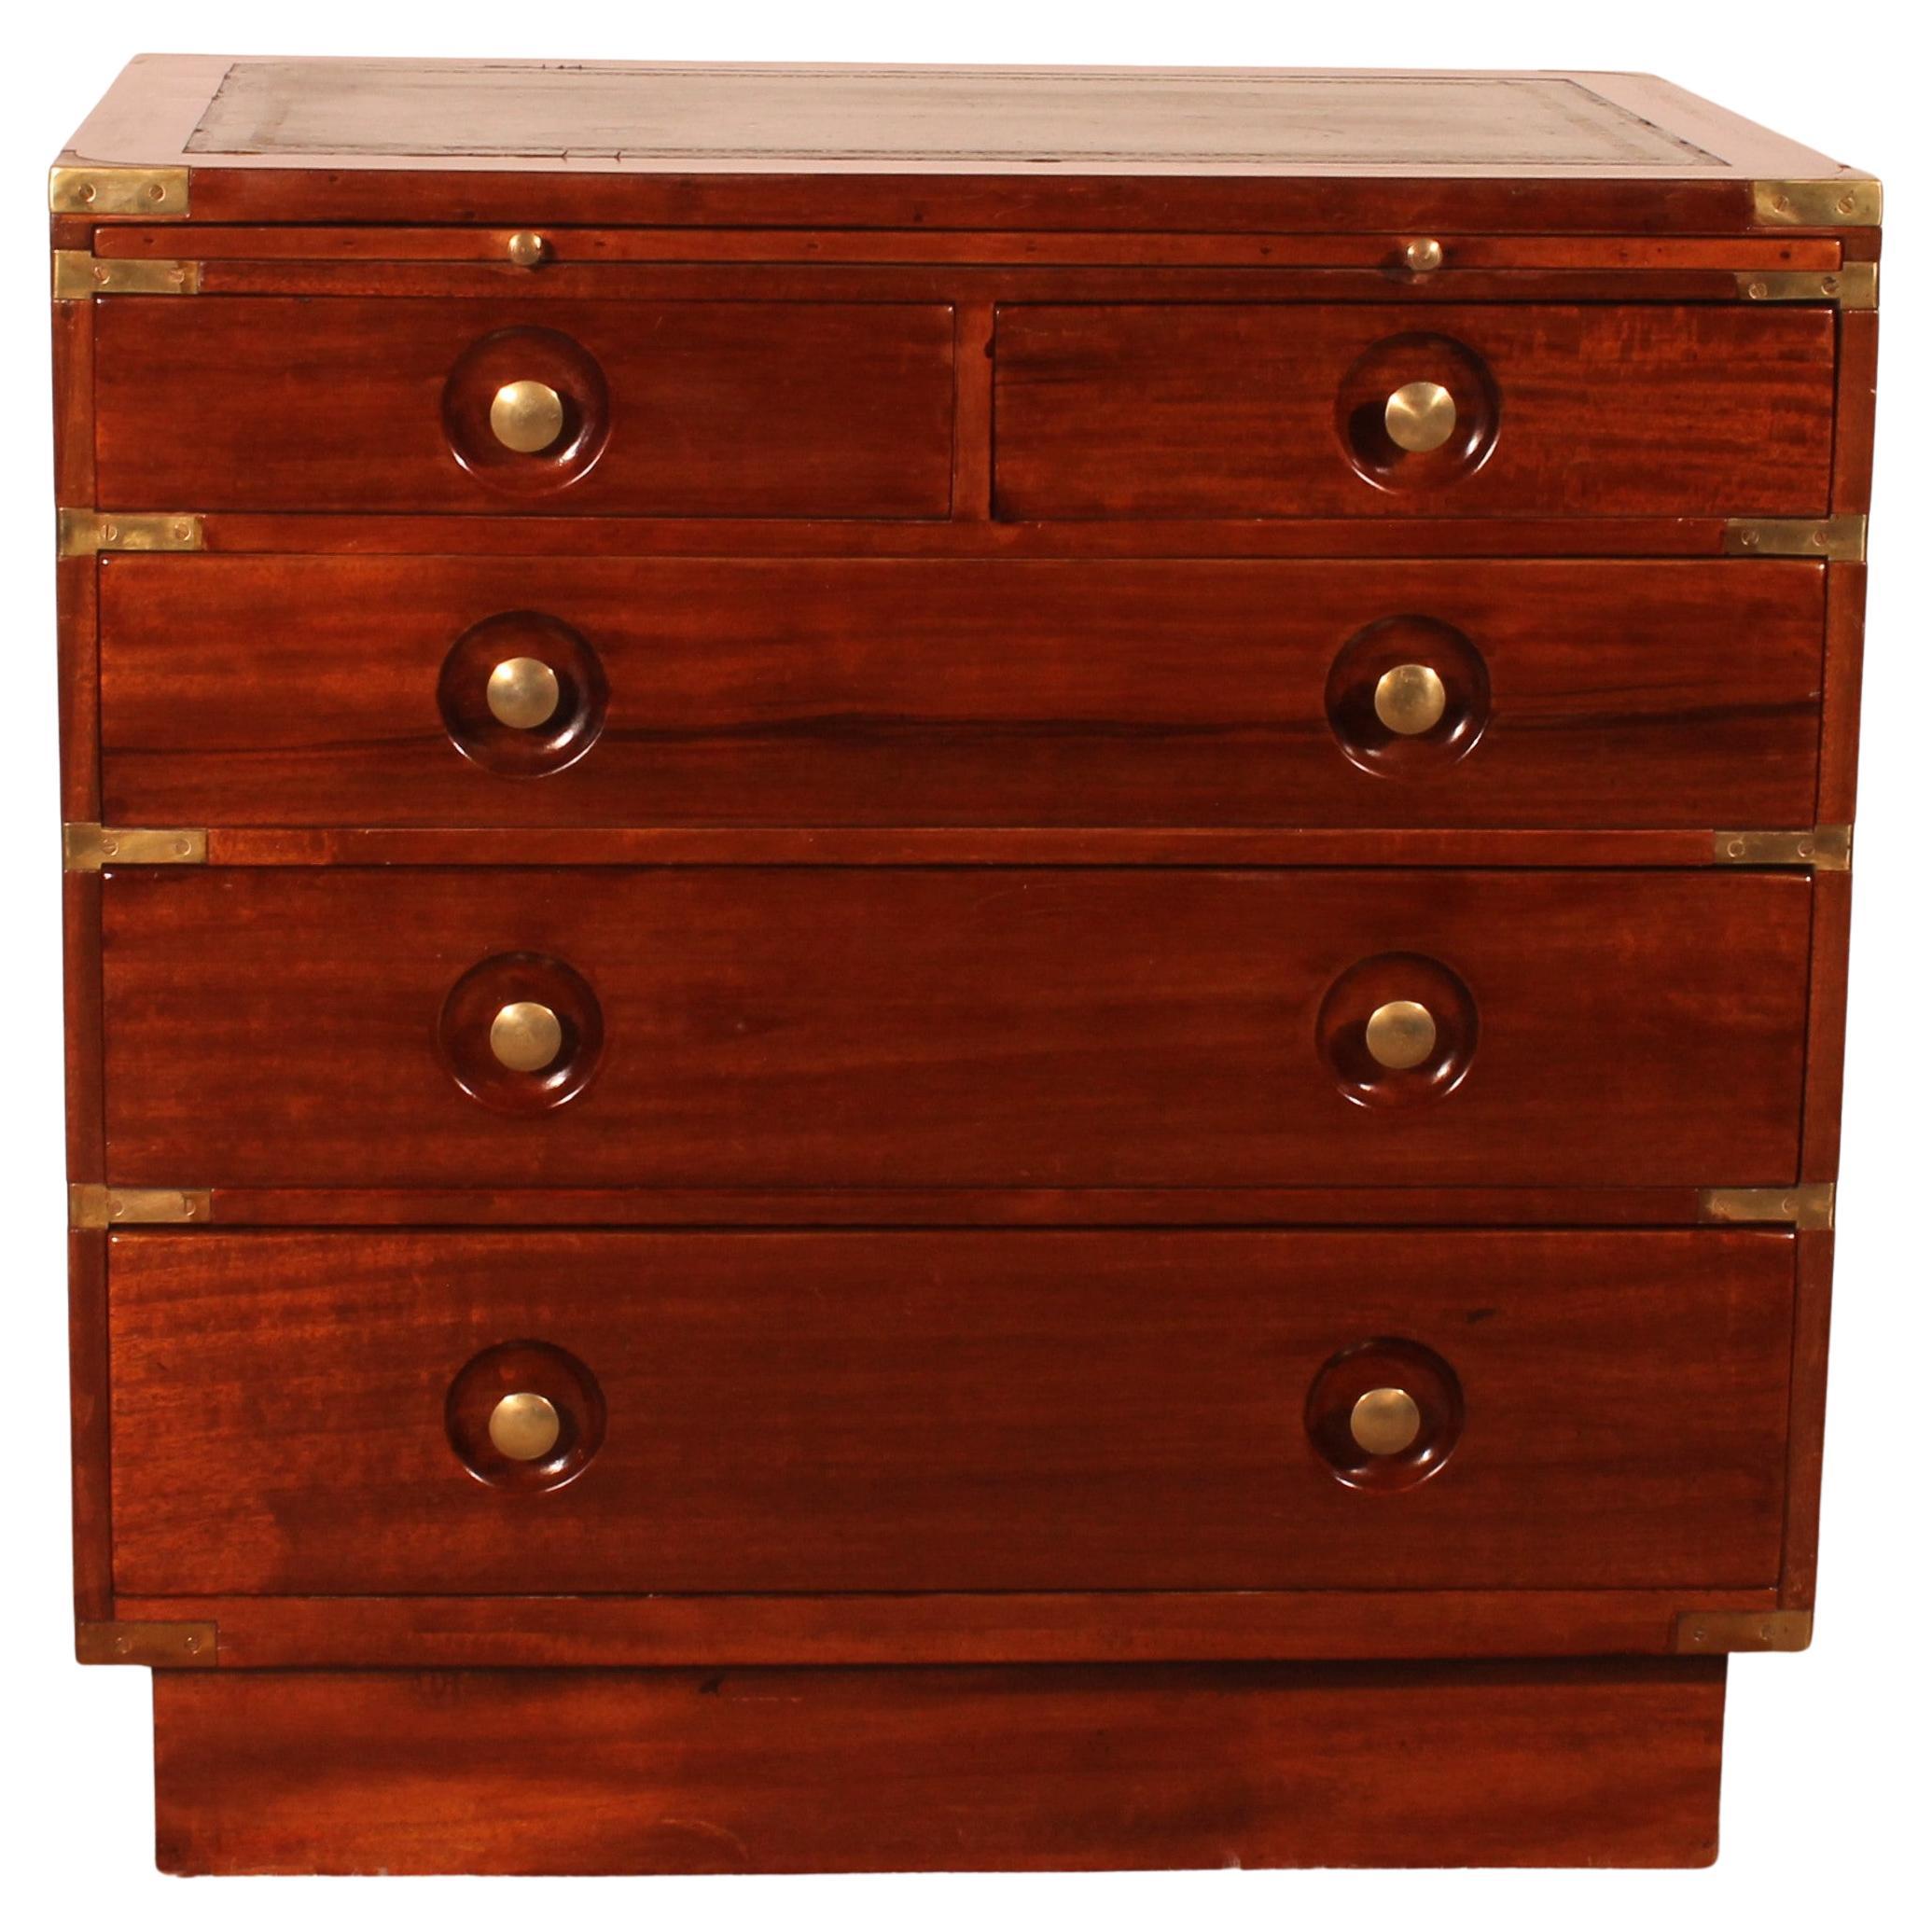 Mahogany Marine / Campaign Chest Of Drawers Of A Cruise Liner For Sale